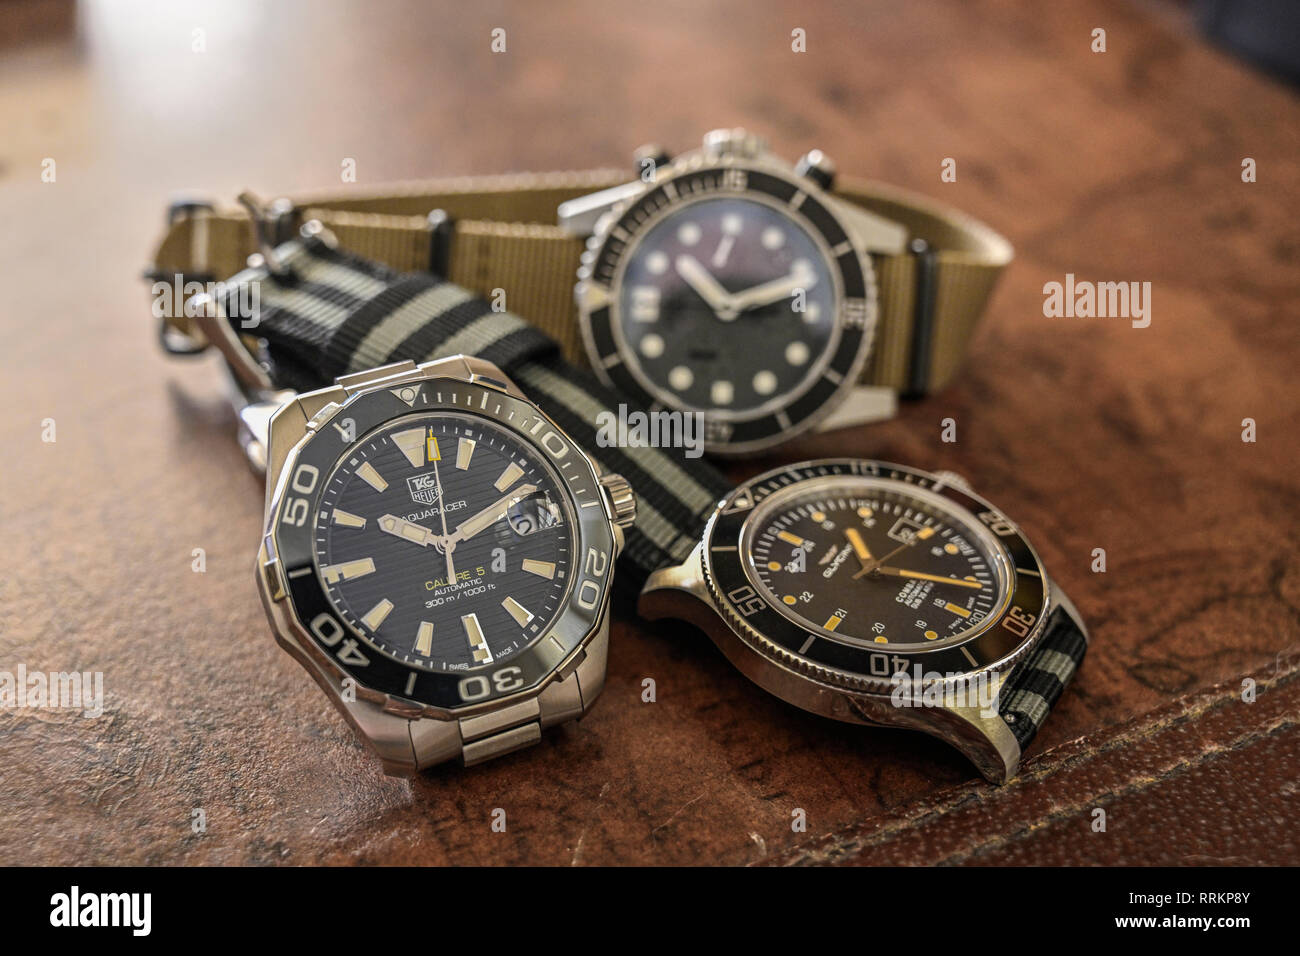 Group of men's luxury diver style wristwatches or timepieces on a dark wood background. Stock Photo